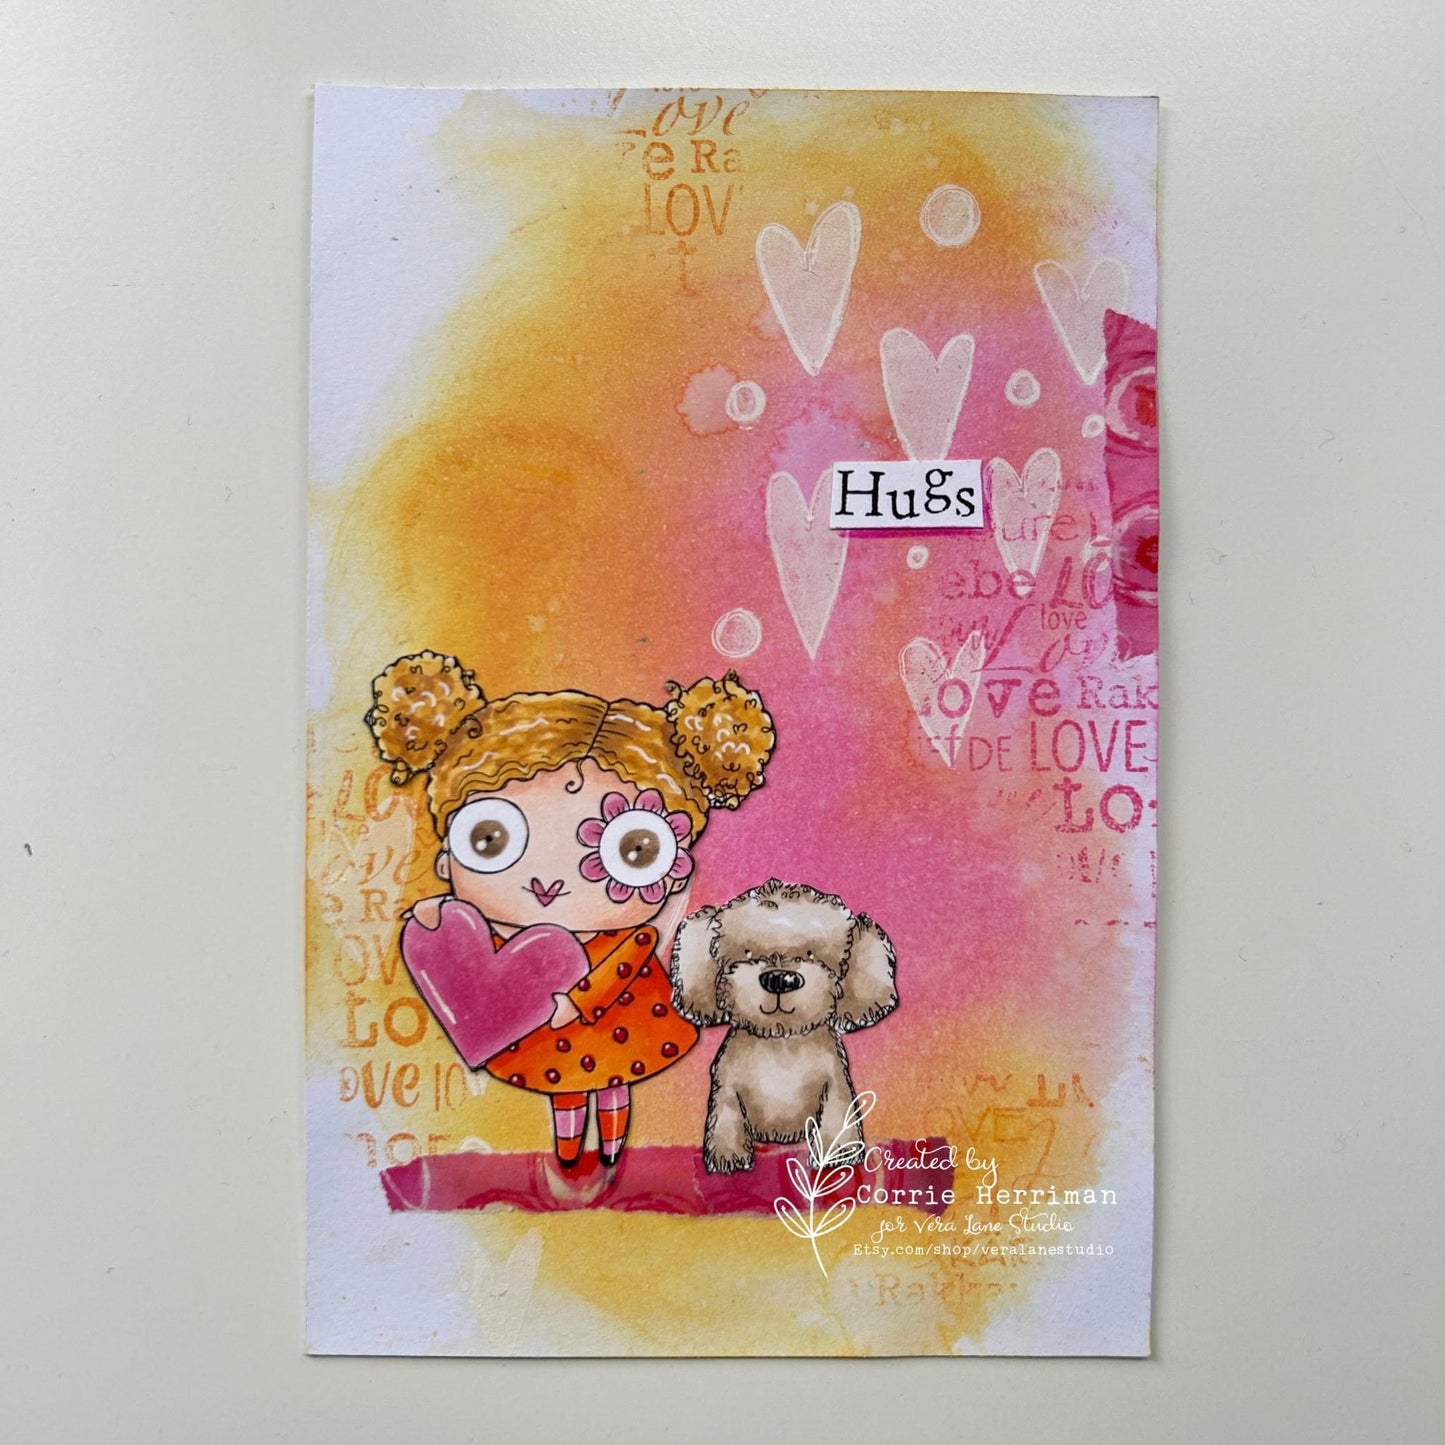 February‘s heart  - 9 Digi stamp bundle in jpg and png files be